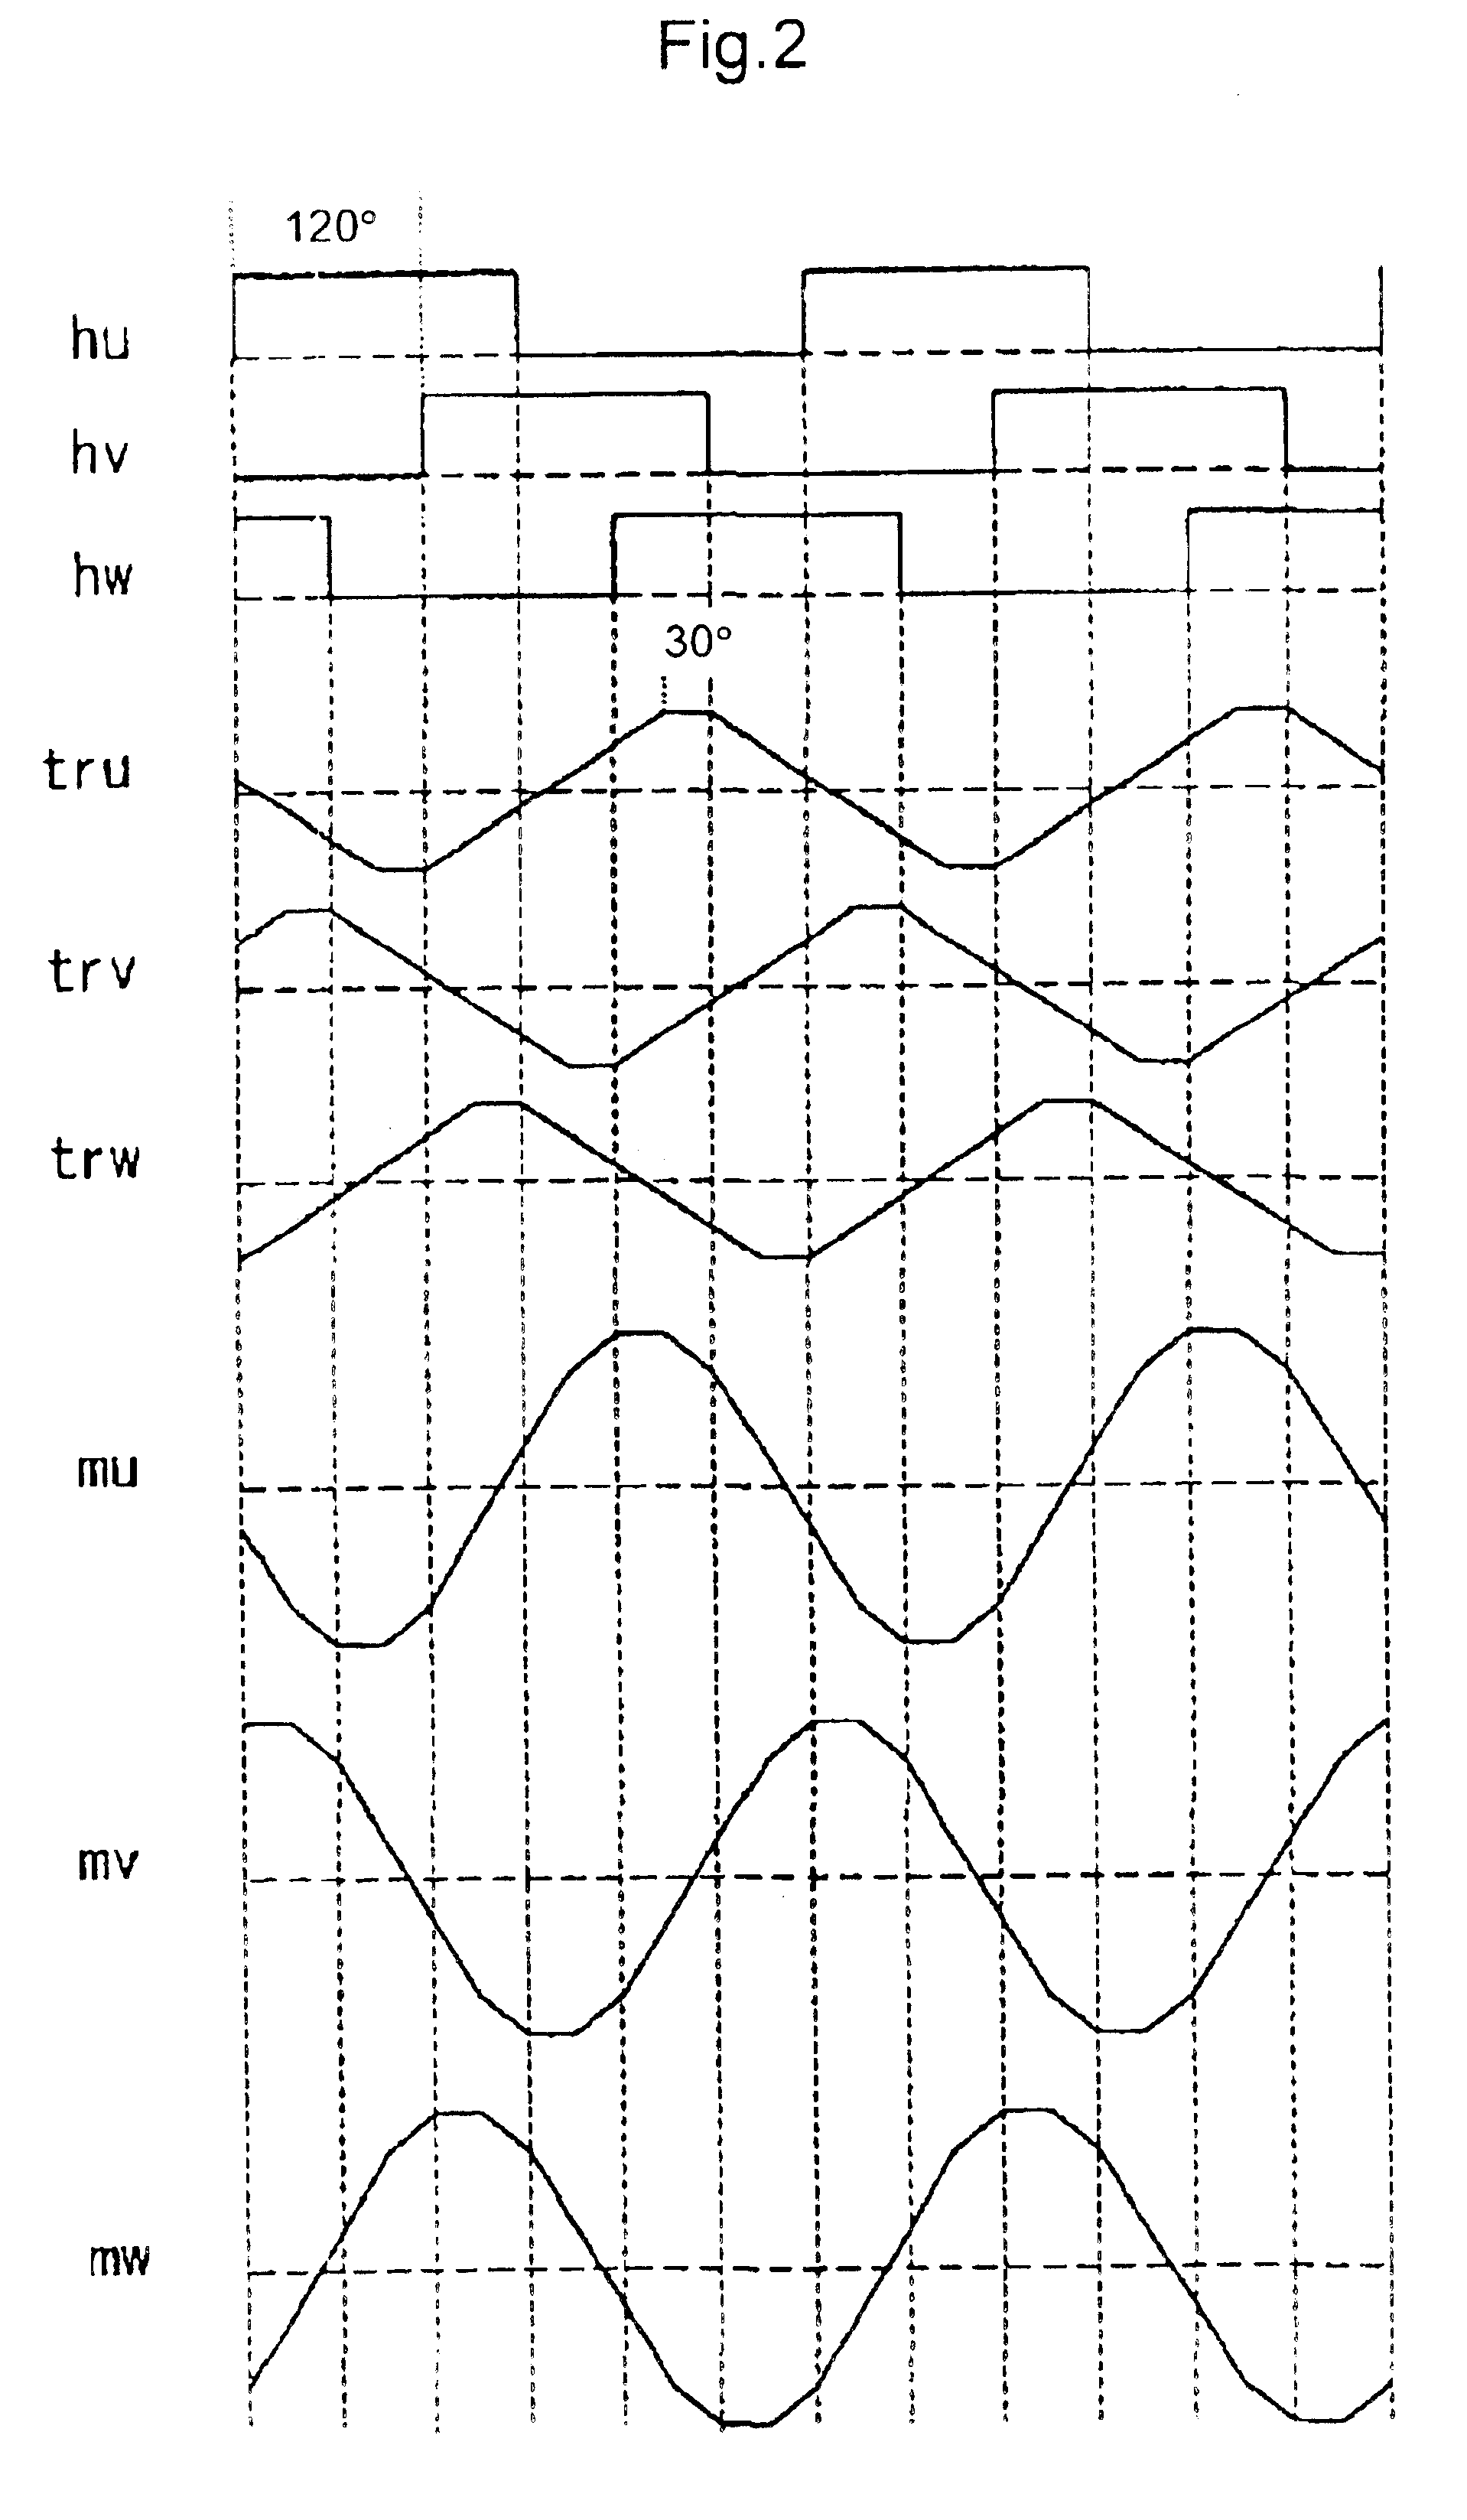 Driving equipment and semiconductor equipment for alternating-current motor